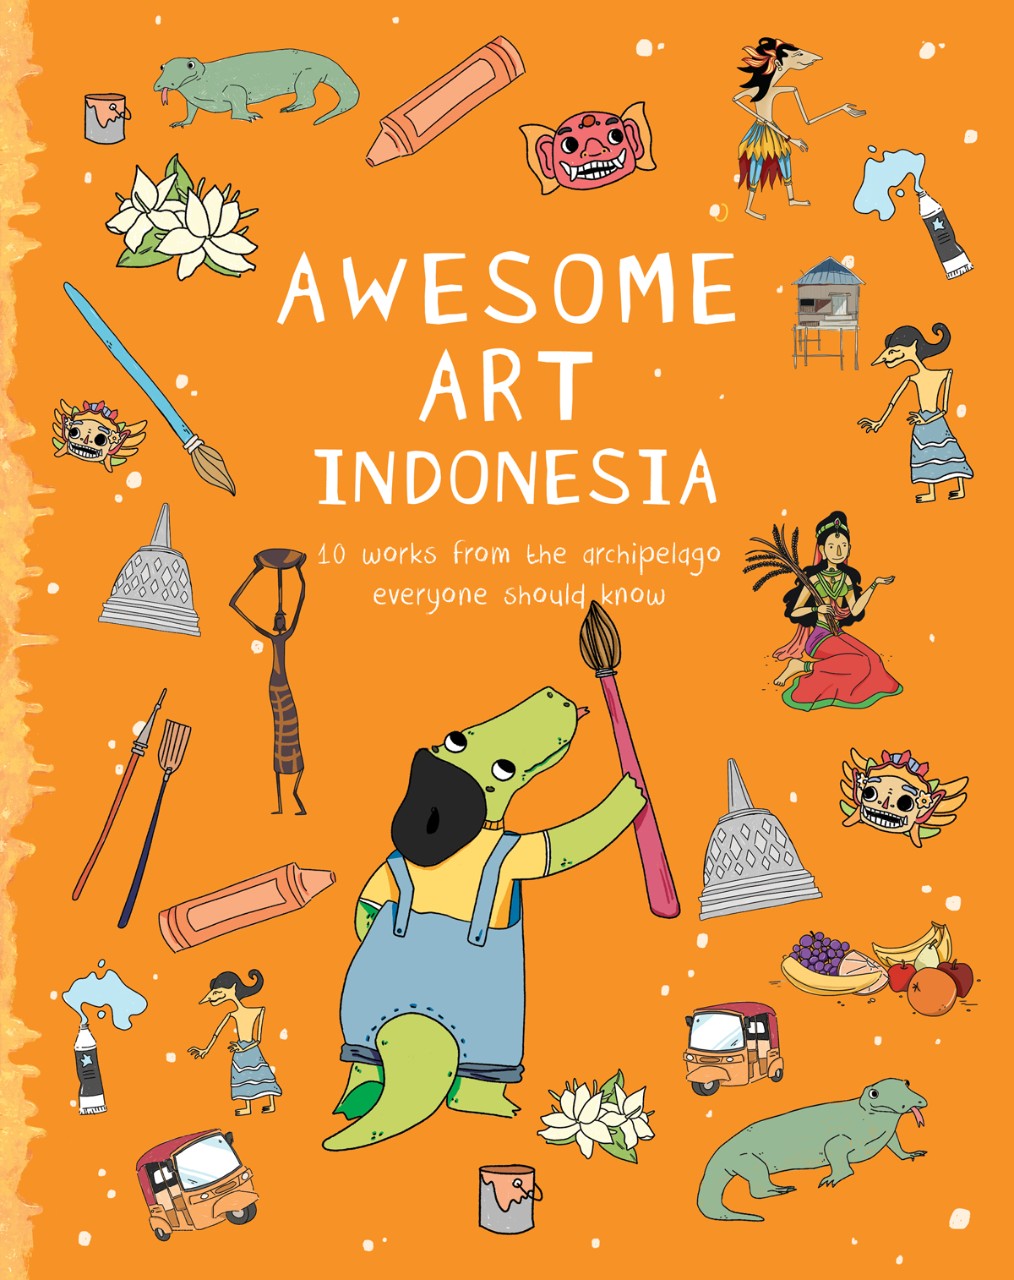 photo of the book cover for Awesome Indonesia